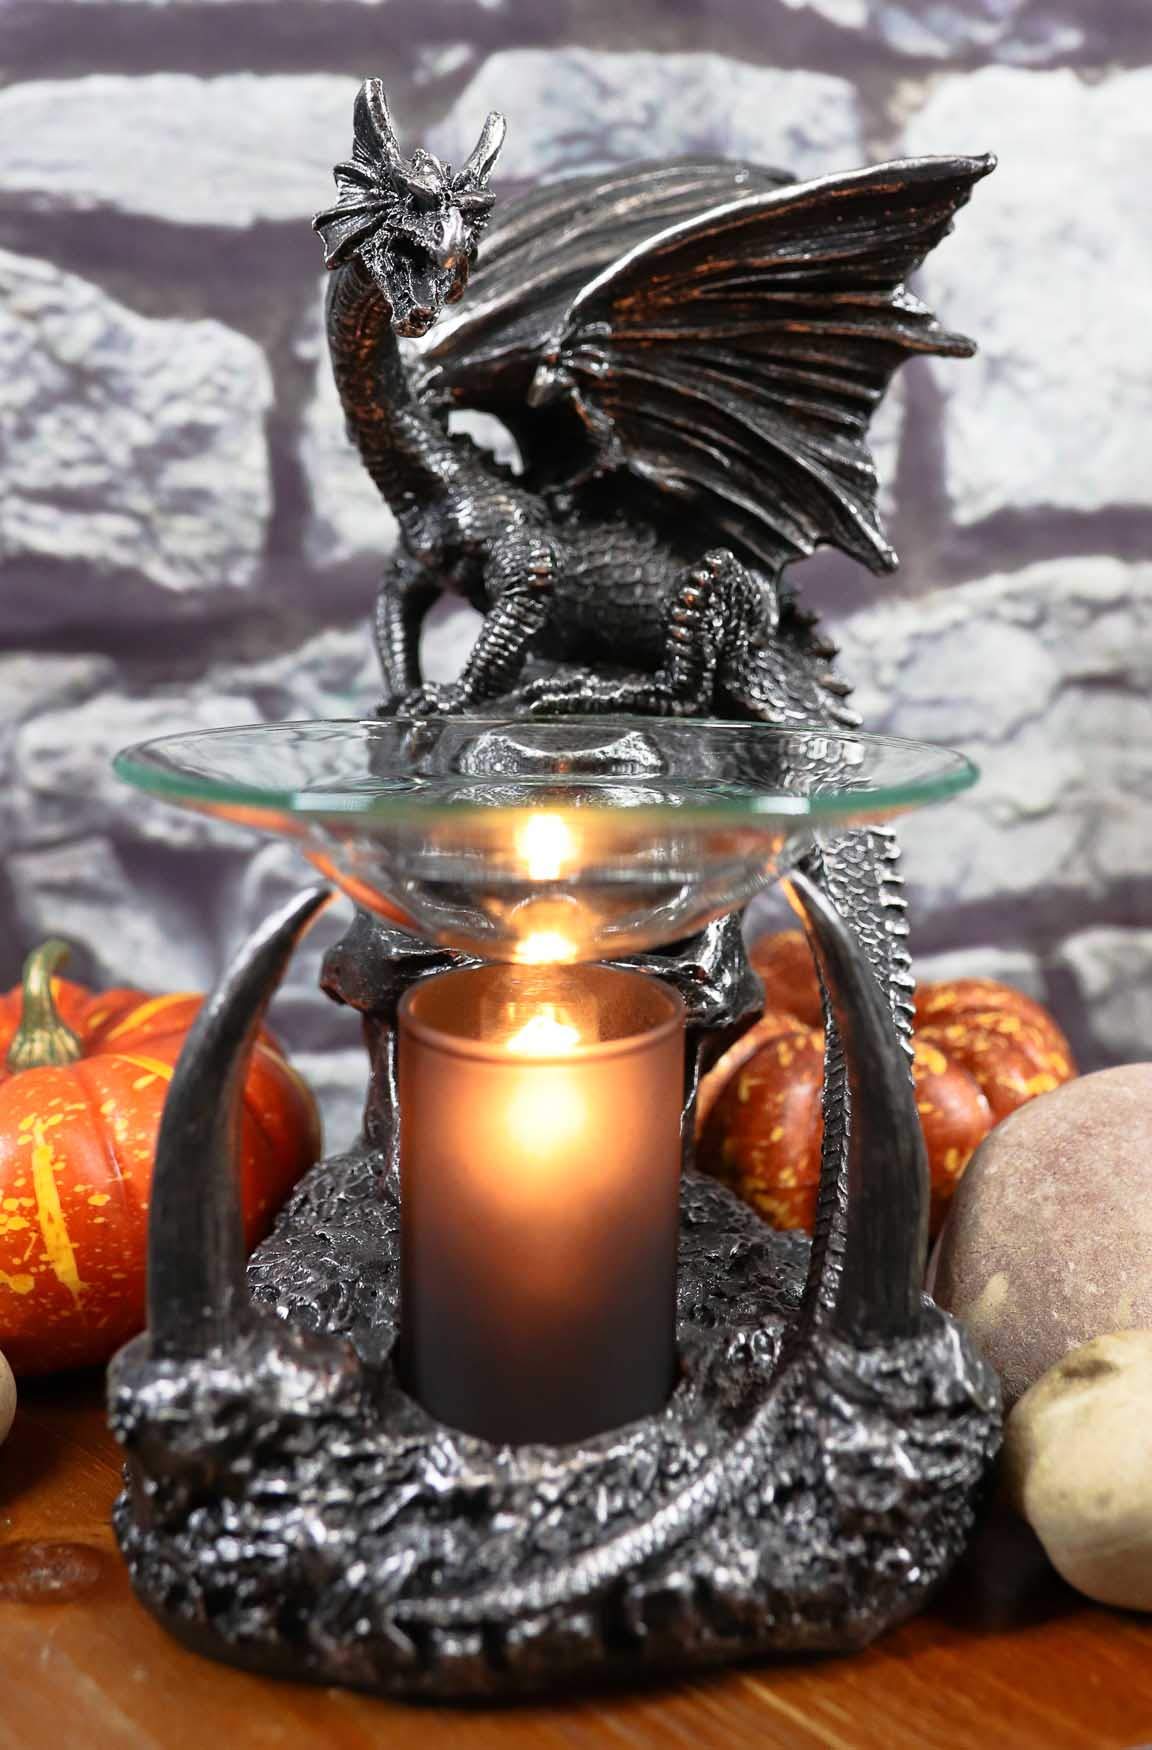 Ebros Smaug Castle Guardian Dragon Electric Oil Diffuser Burner Tart Warmer Aroma Scent Statue 9.5" Tall Figurine Dungeons and Dragons Decorative Decor for Aromatherapy Accessory Halloween Prop